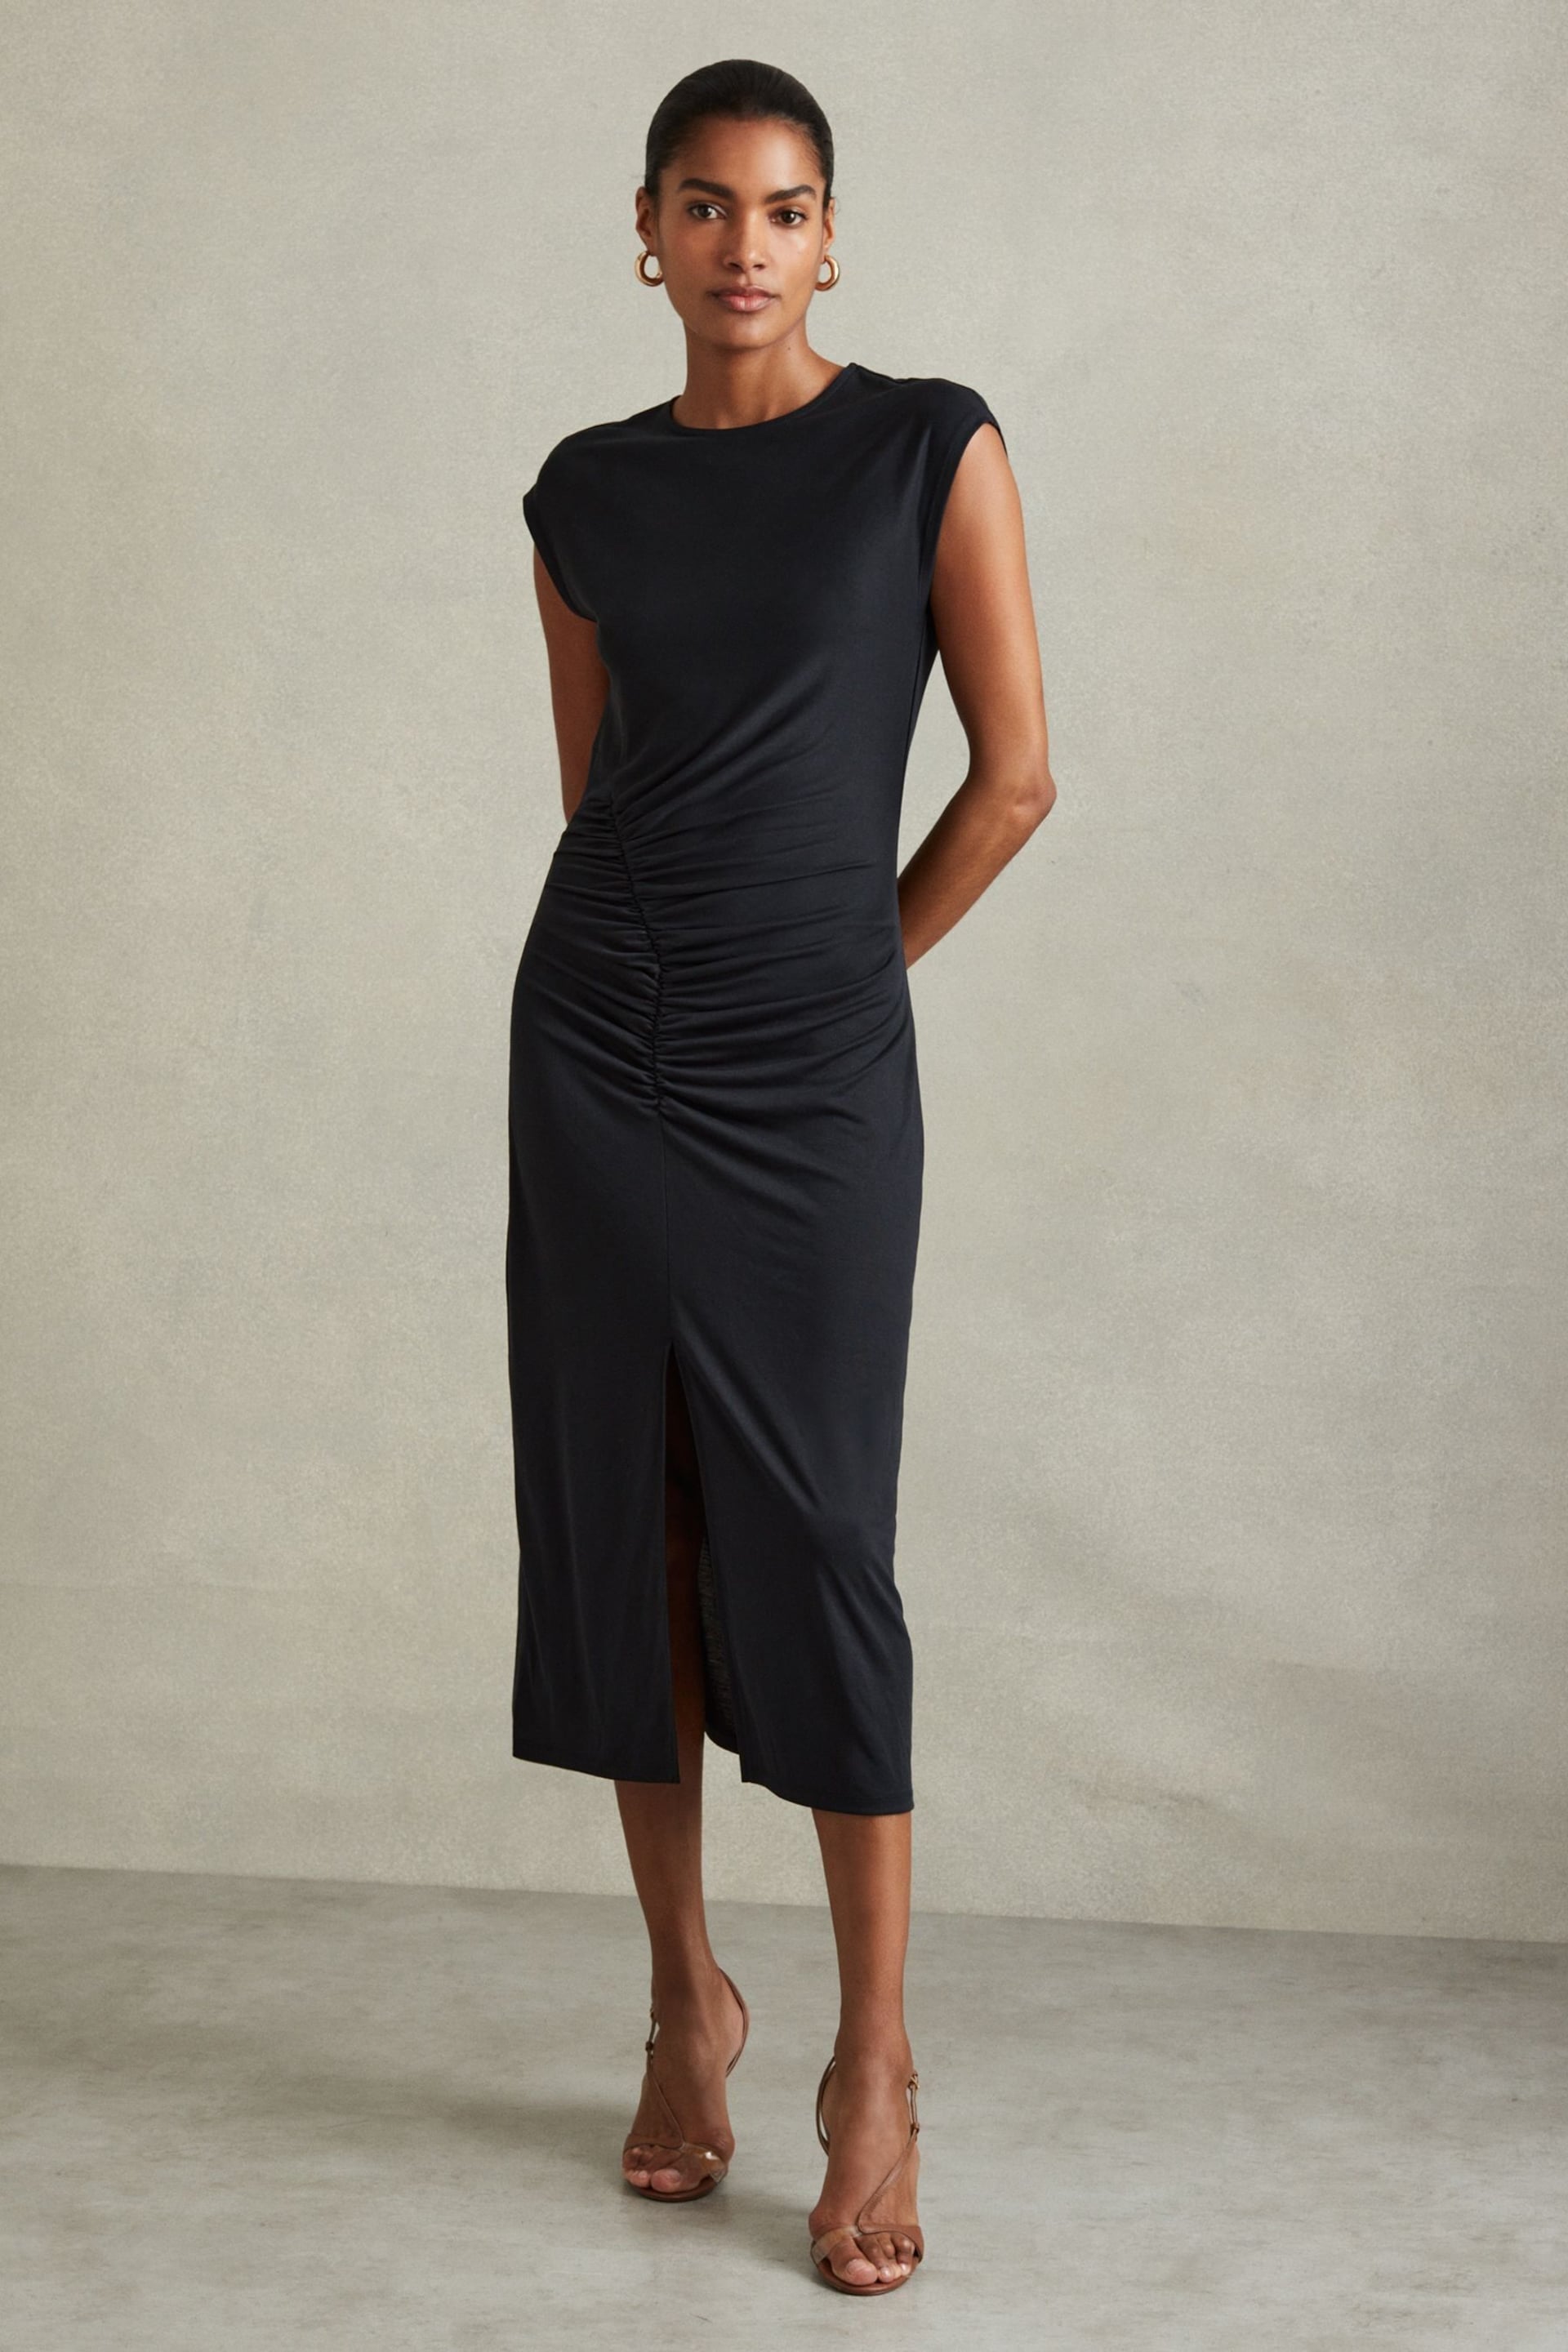 Reiss Charcoal Lenara Ruche Front Capped Sleeve Jersey Midi Dress - Image 1 of 5